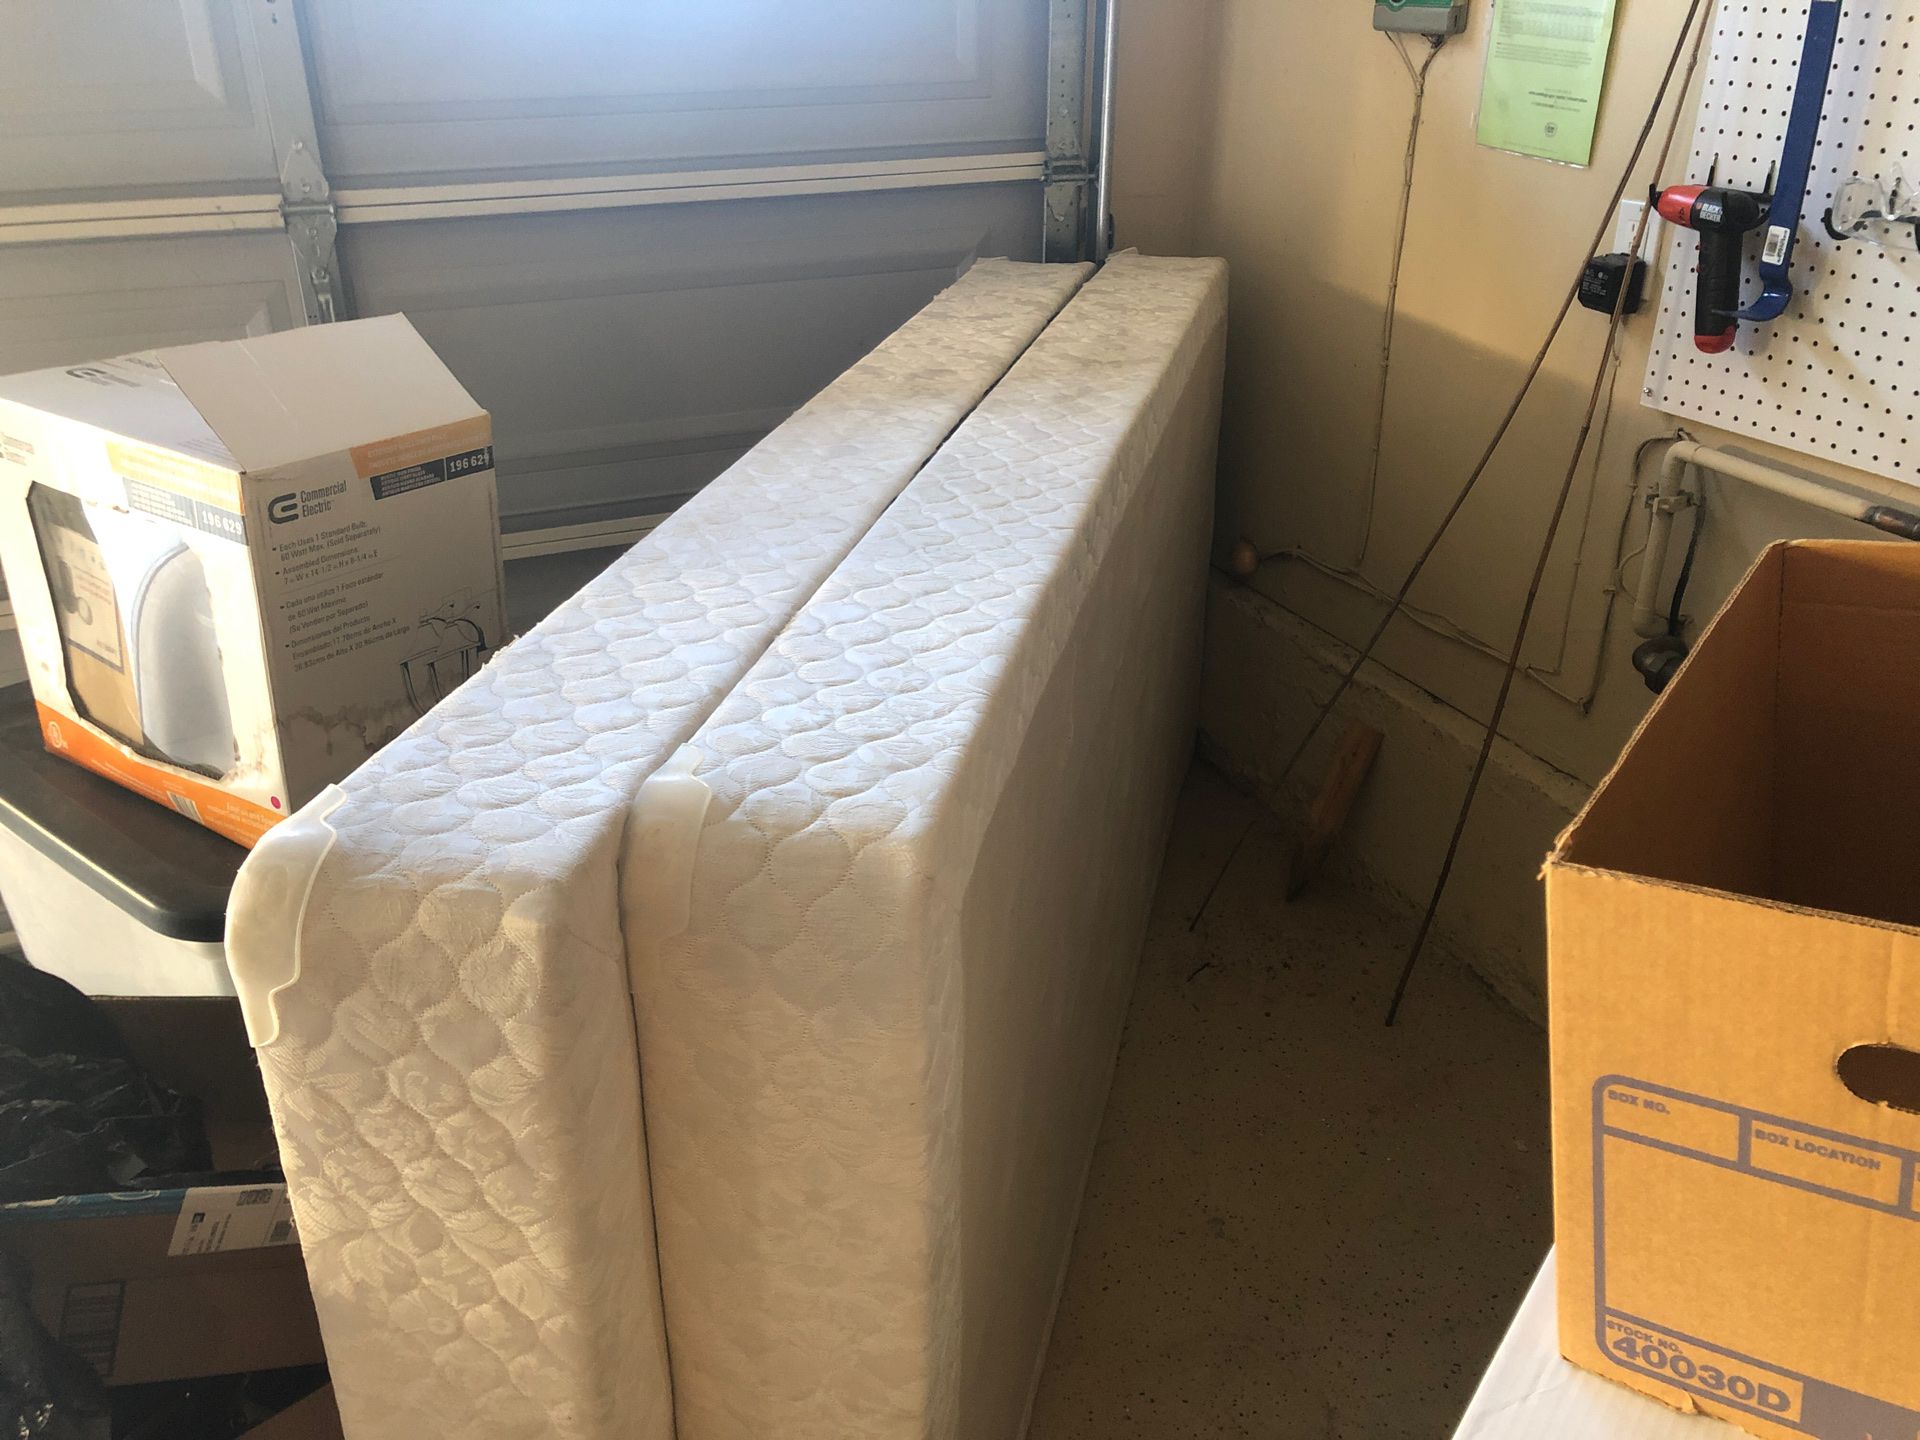 Free (2) box springs for king bed